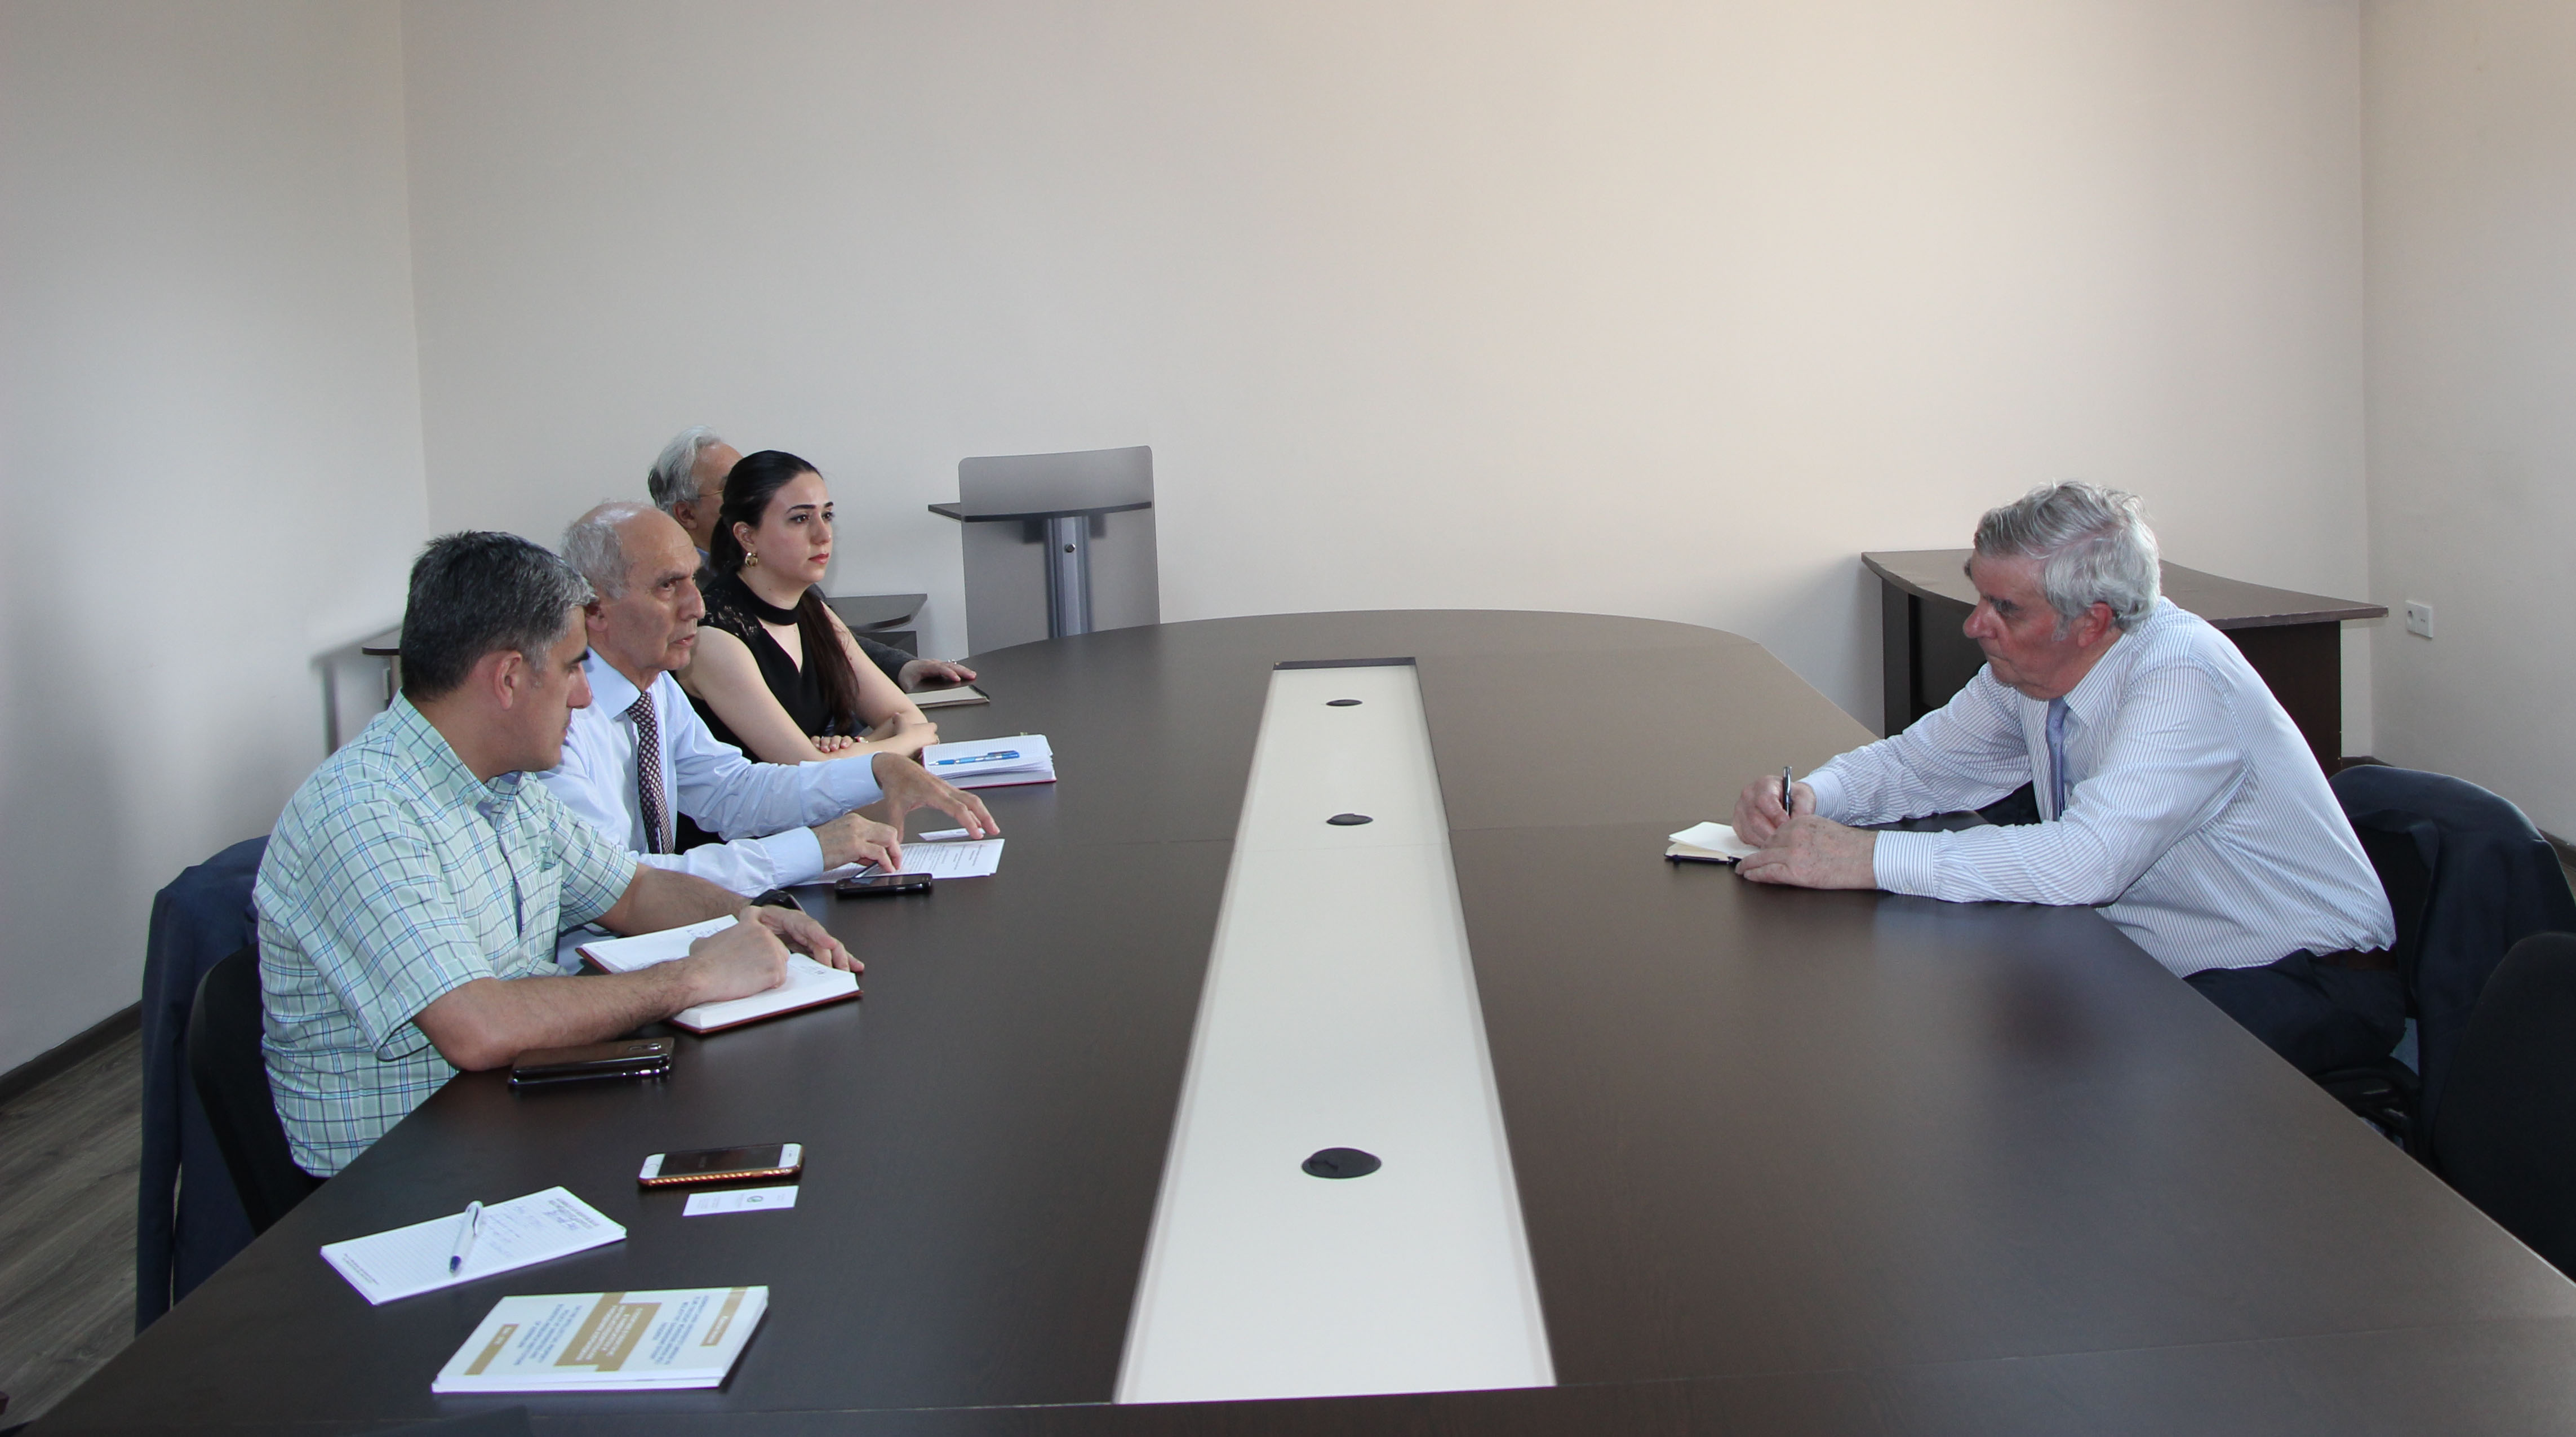 ​Meeting was held with an Irish expert at Intellectual Property Agency